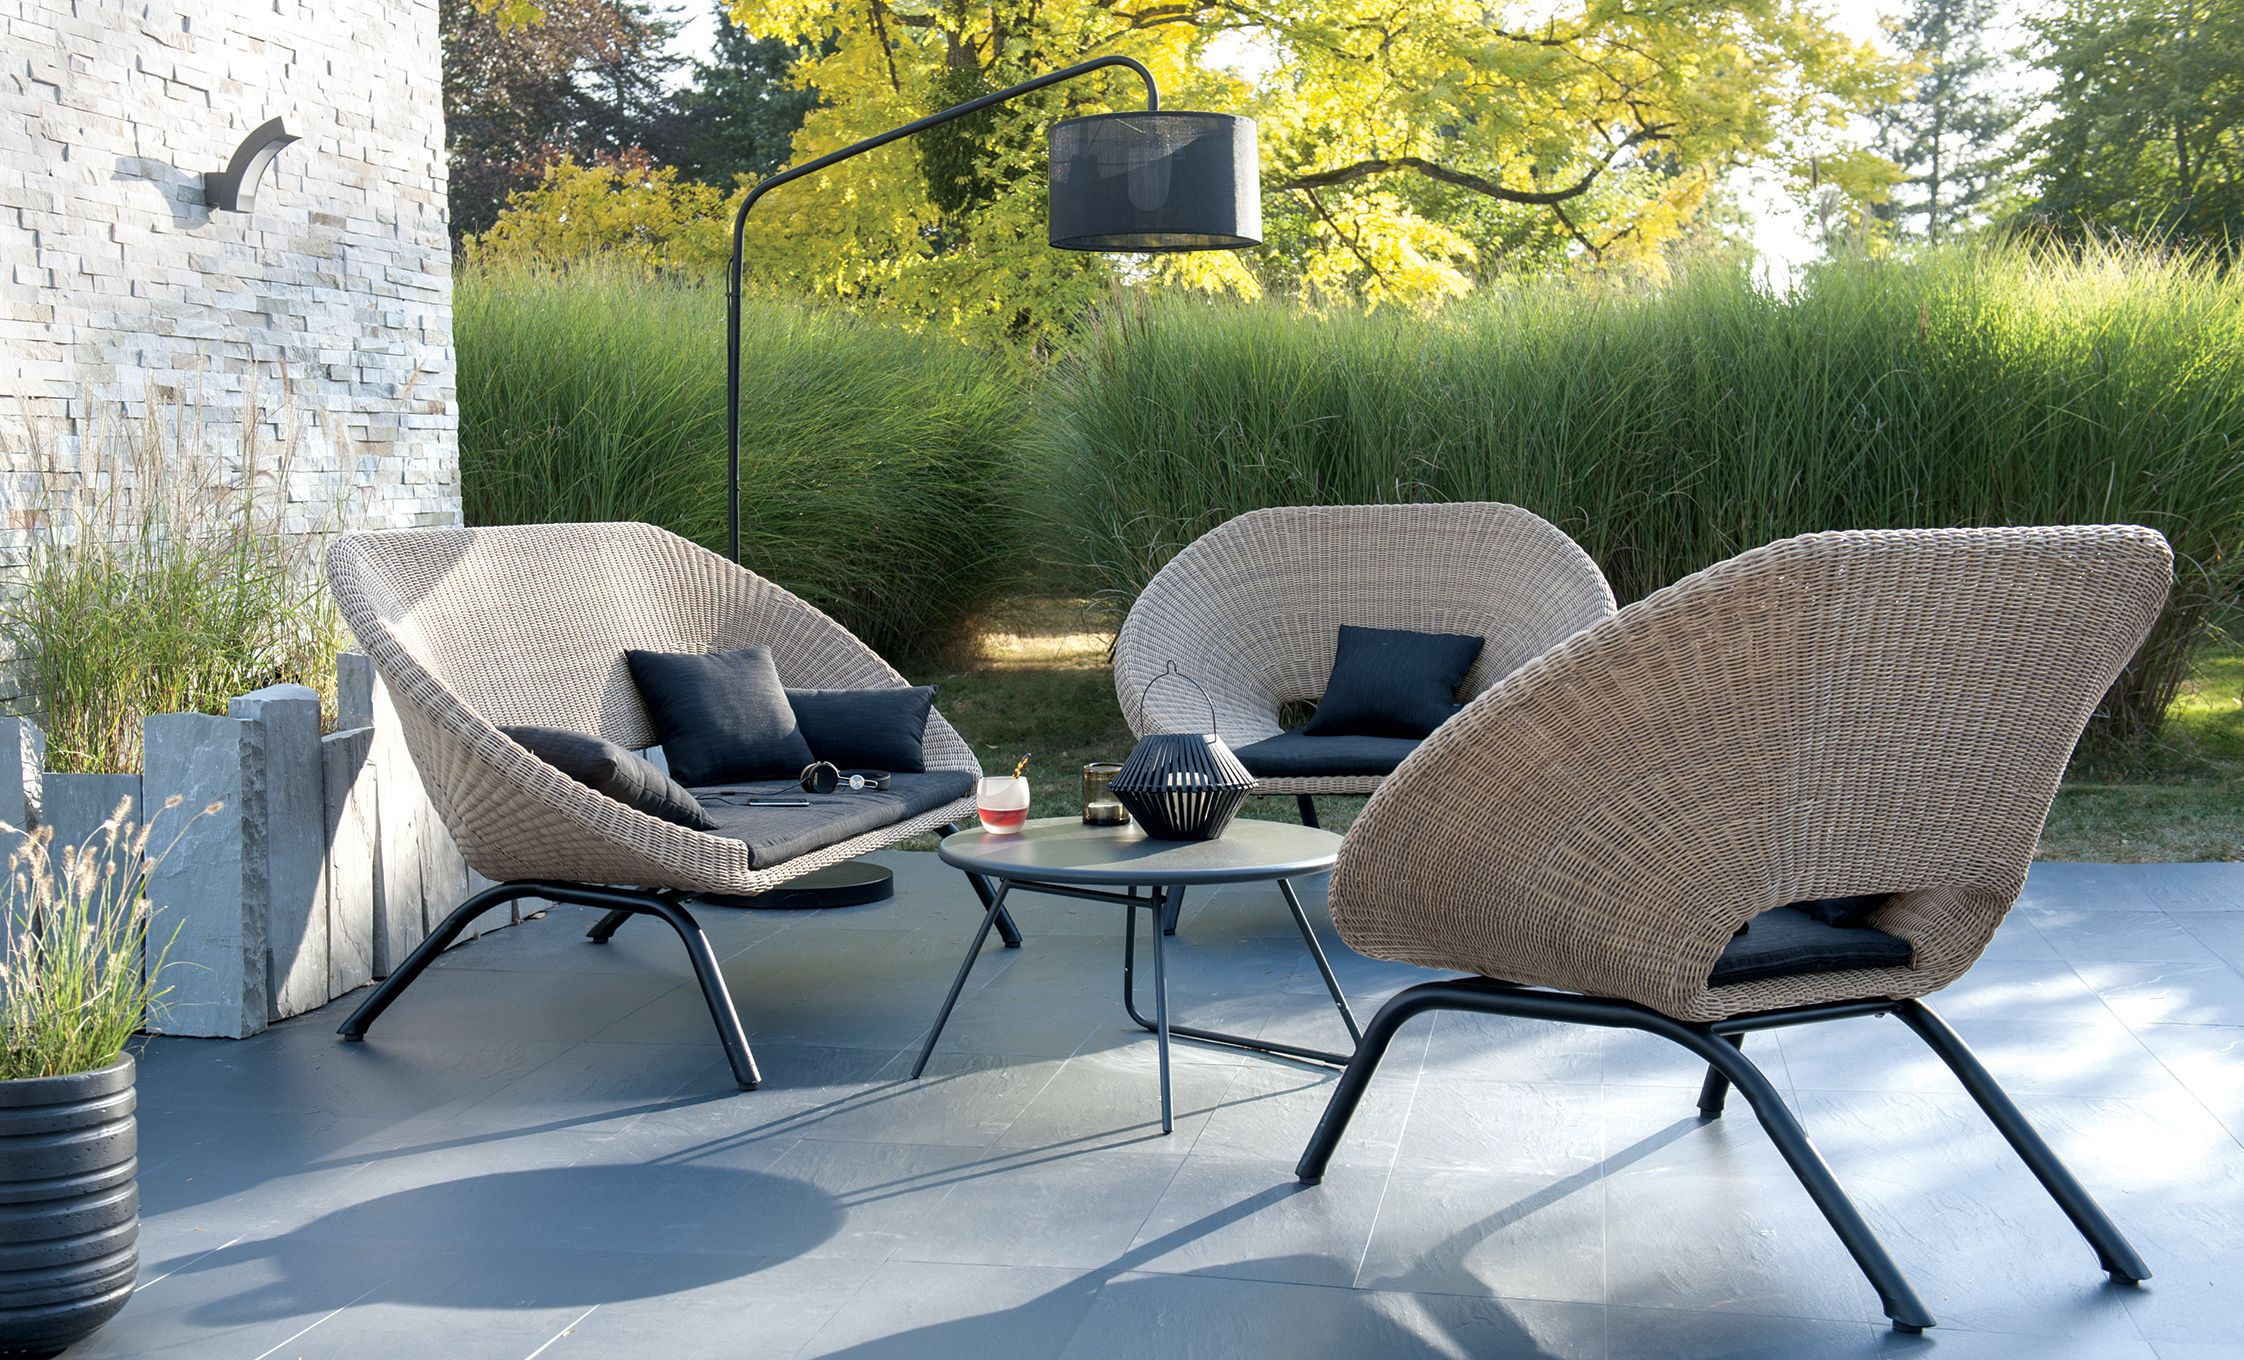 Loa Is An Outdoor Furniture Set Which Has Been Designed To ... concernant Mobilier De Jardin Blooma